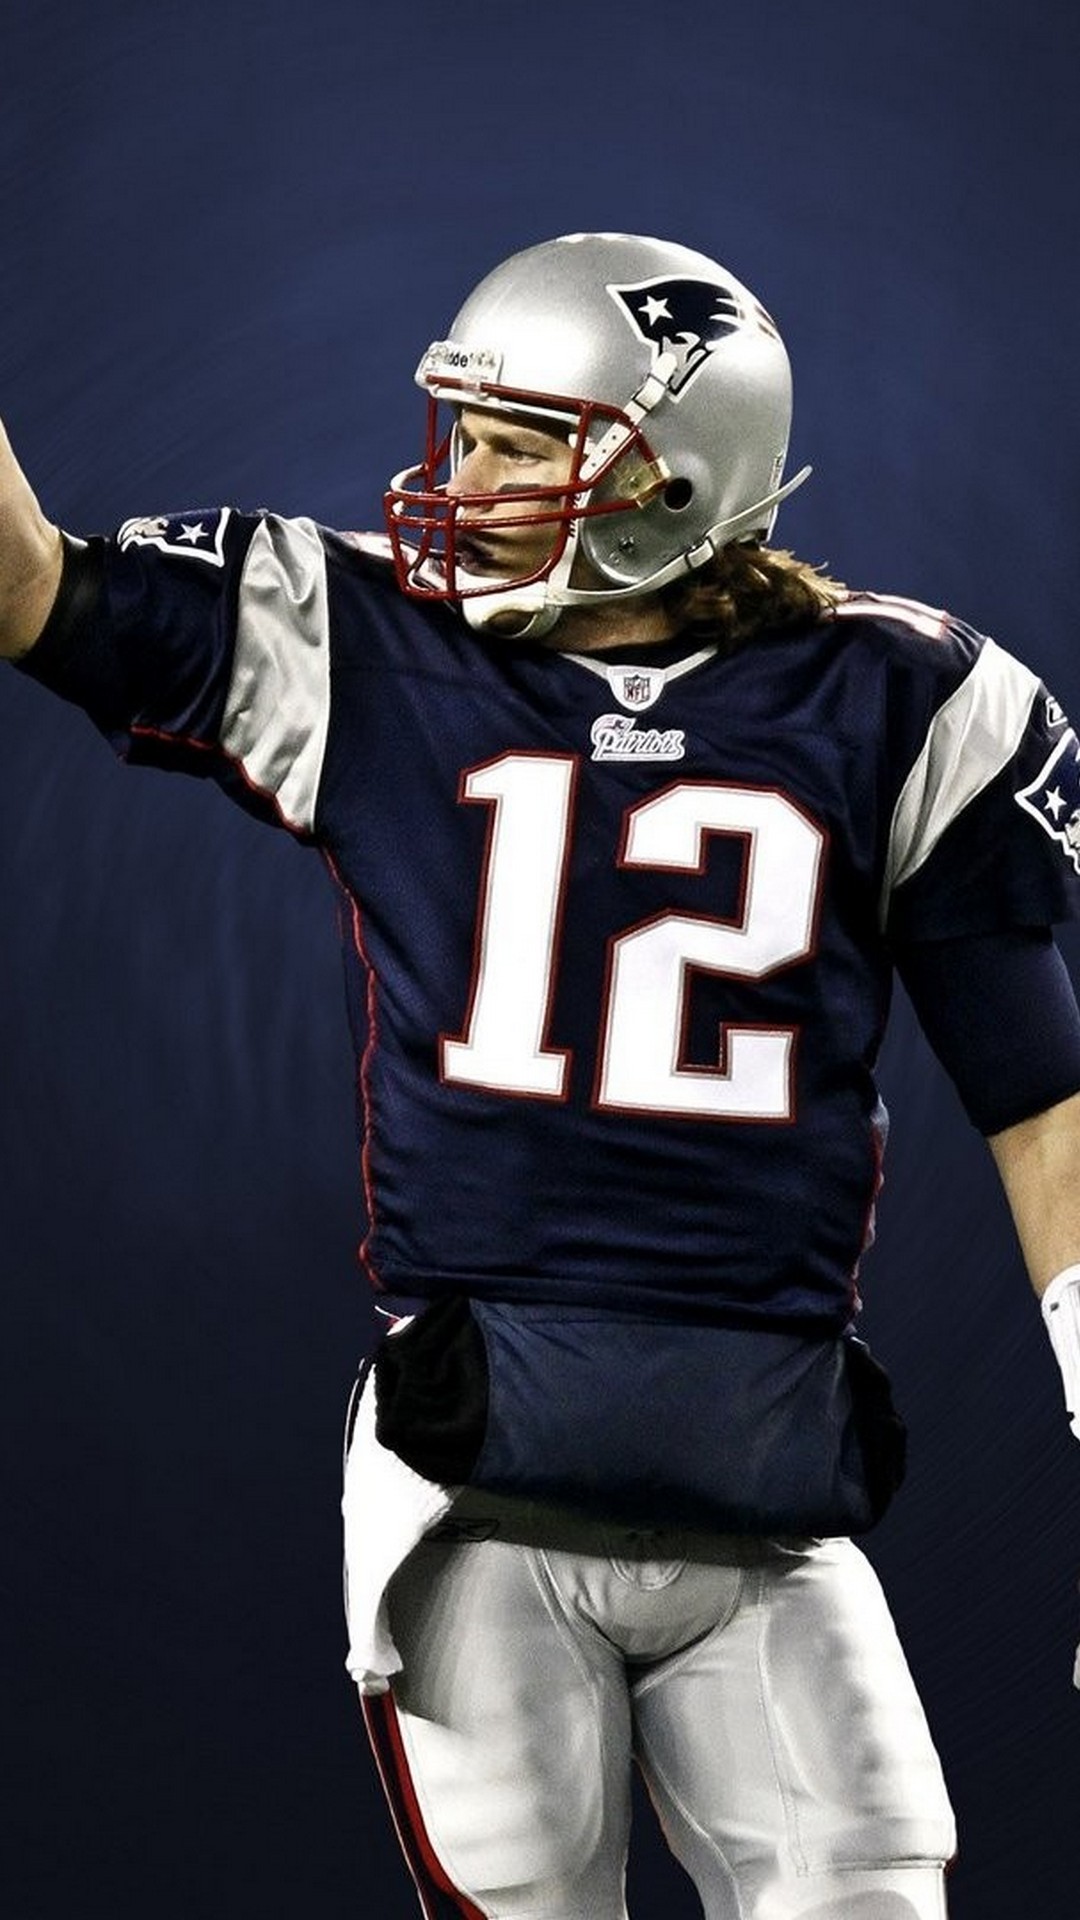 Tom Brady Patriots Wallpaper iPhone With high-resolution 1080X1920 pixel. You can use this wallpaper for your iPhone 5, 6, 7, 8, X, XS, XR backgrounds, Mobile Screensaver, or iPad Lock Screen